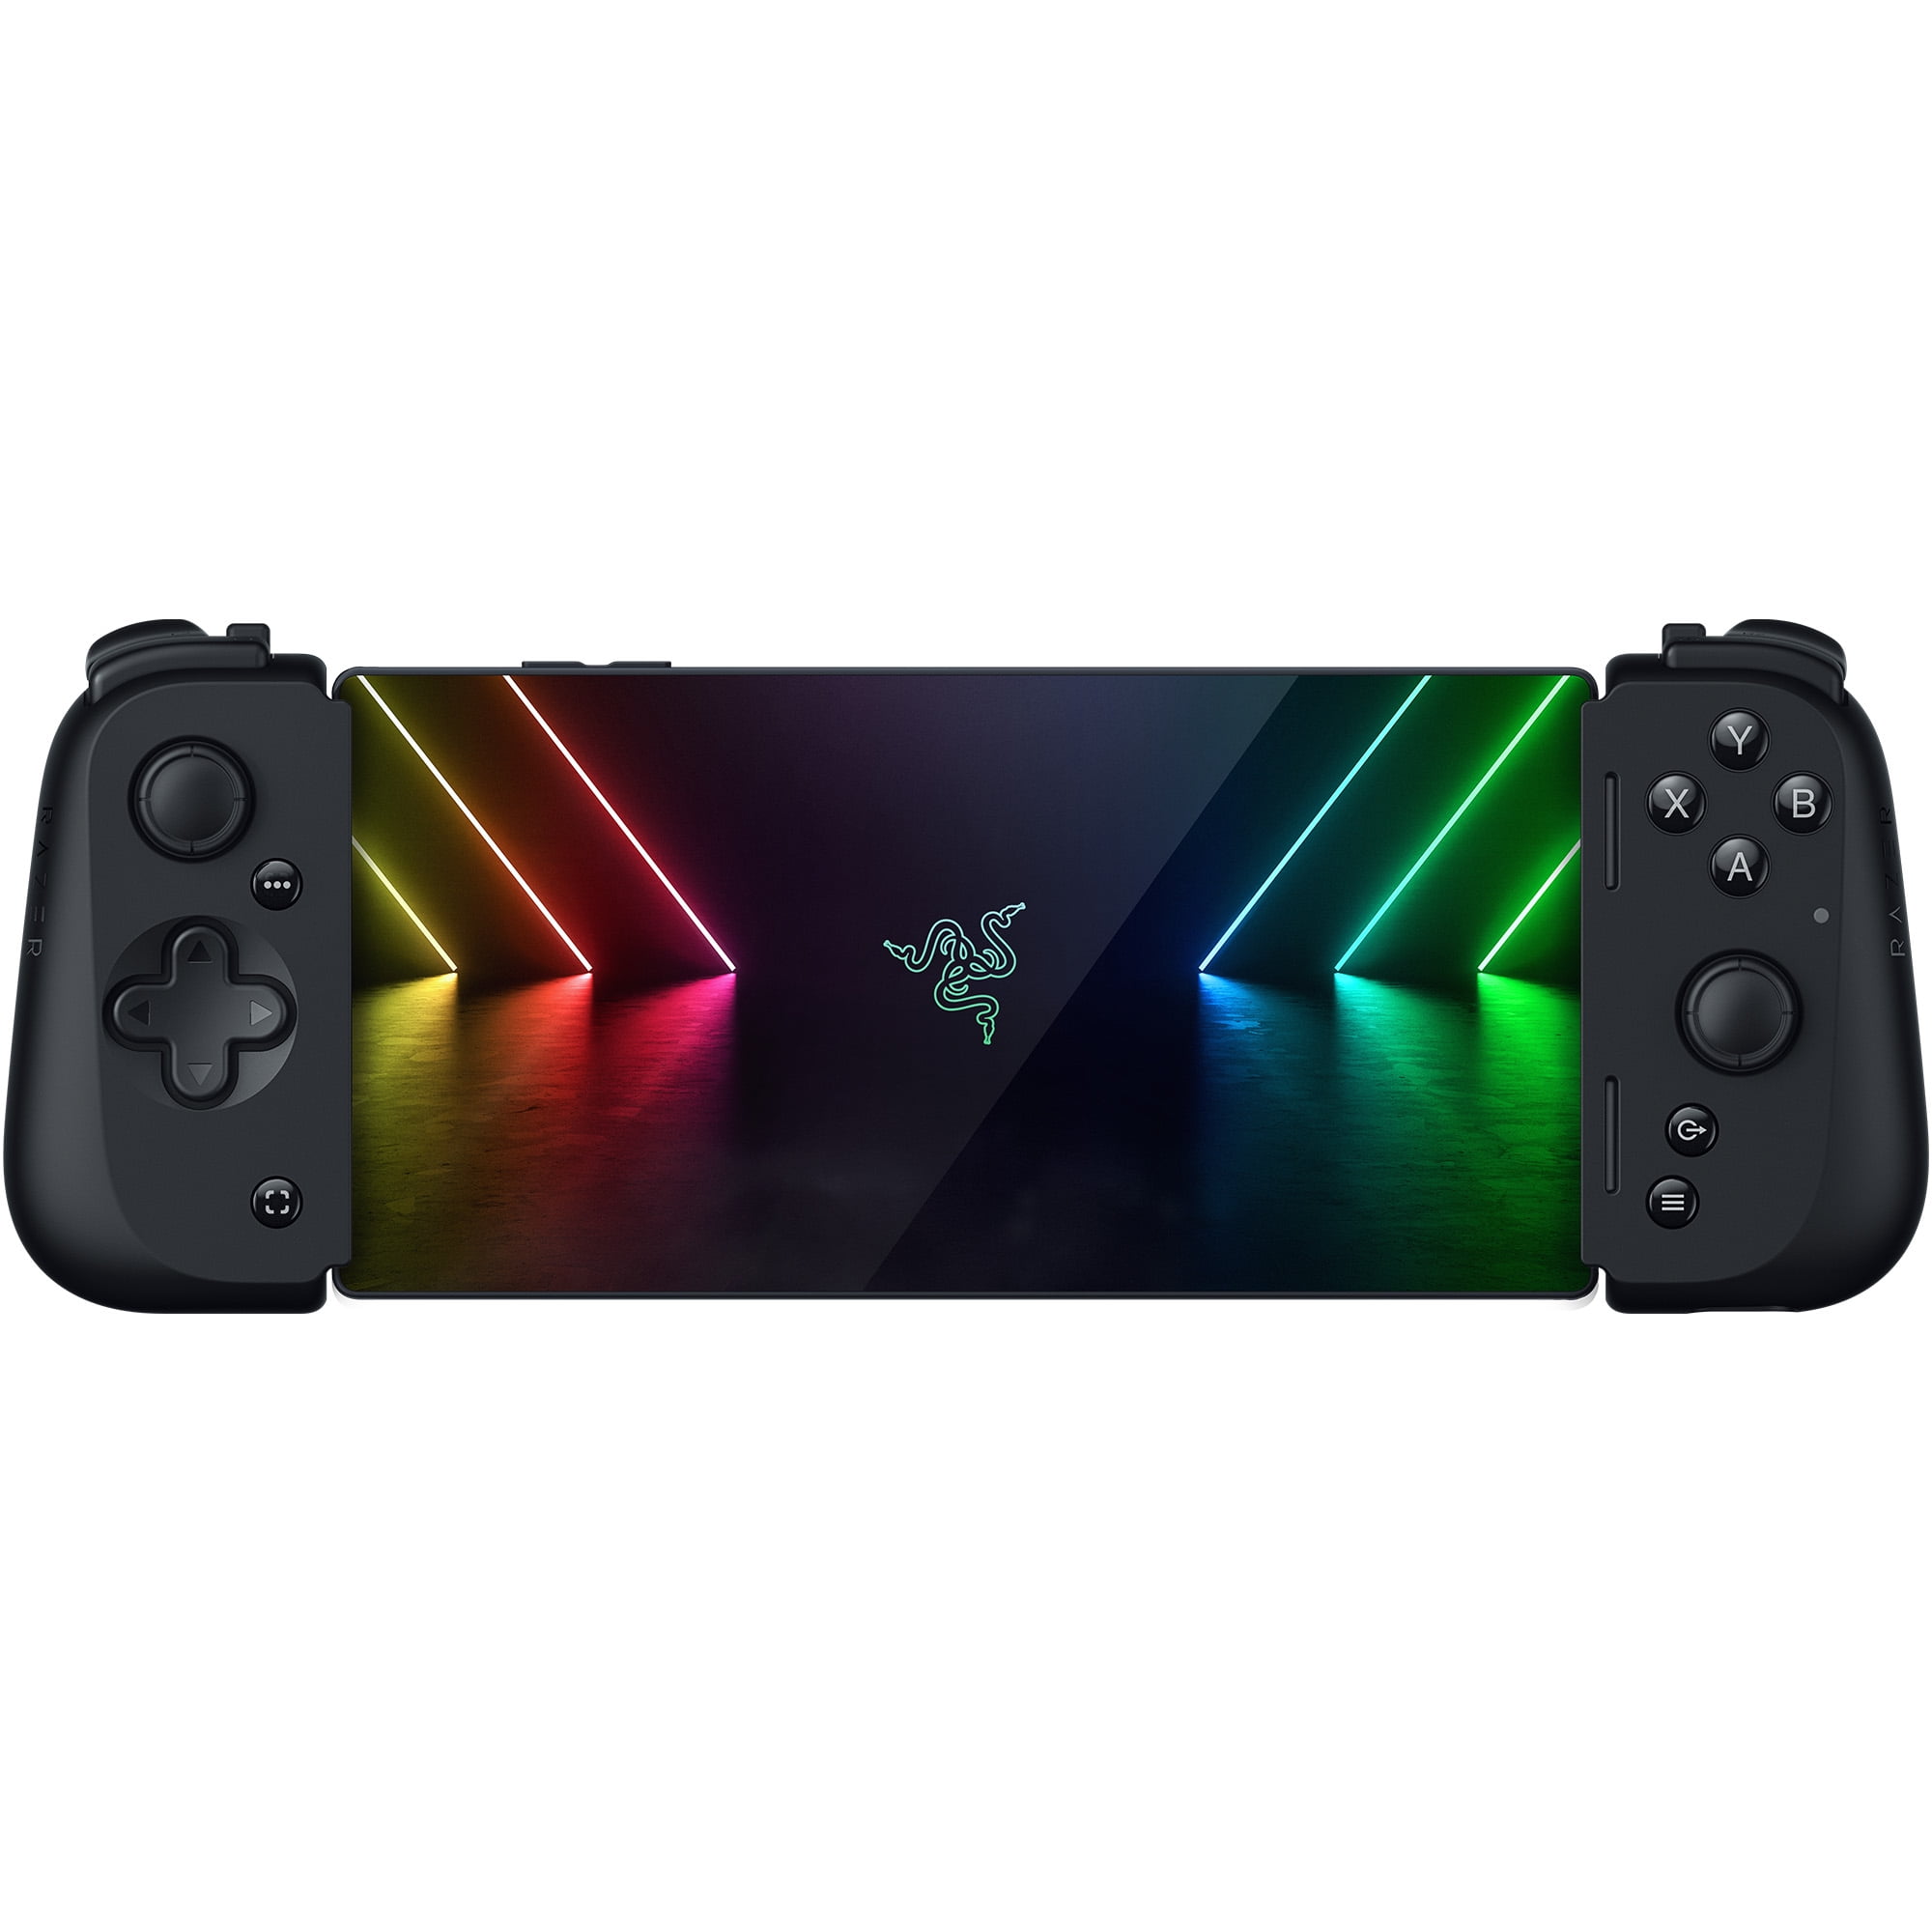 Razer Kishi V2 Review: Android Game Controller Goes From Good to Great -  CNET